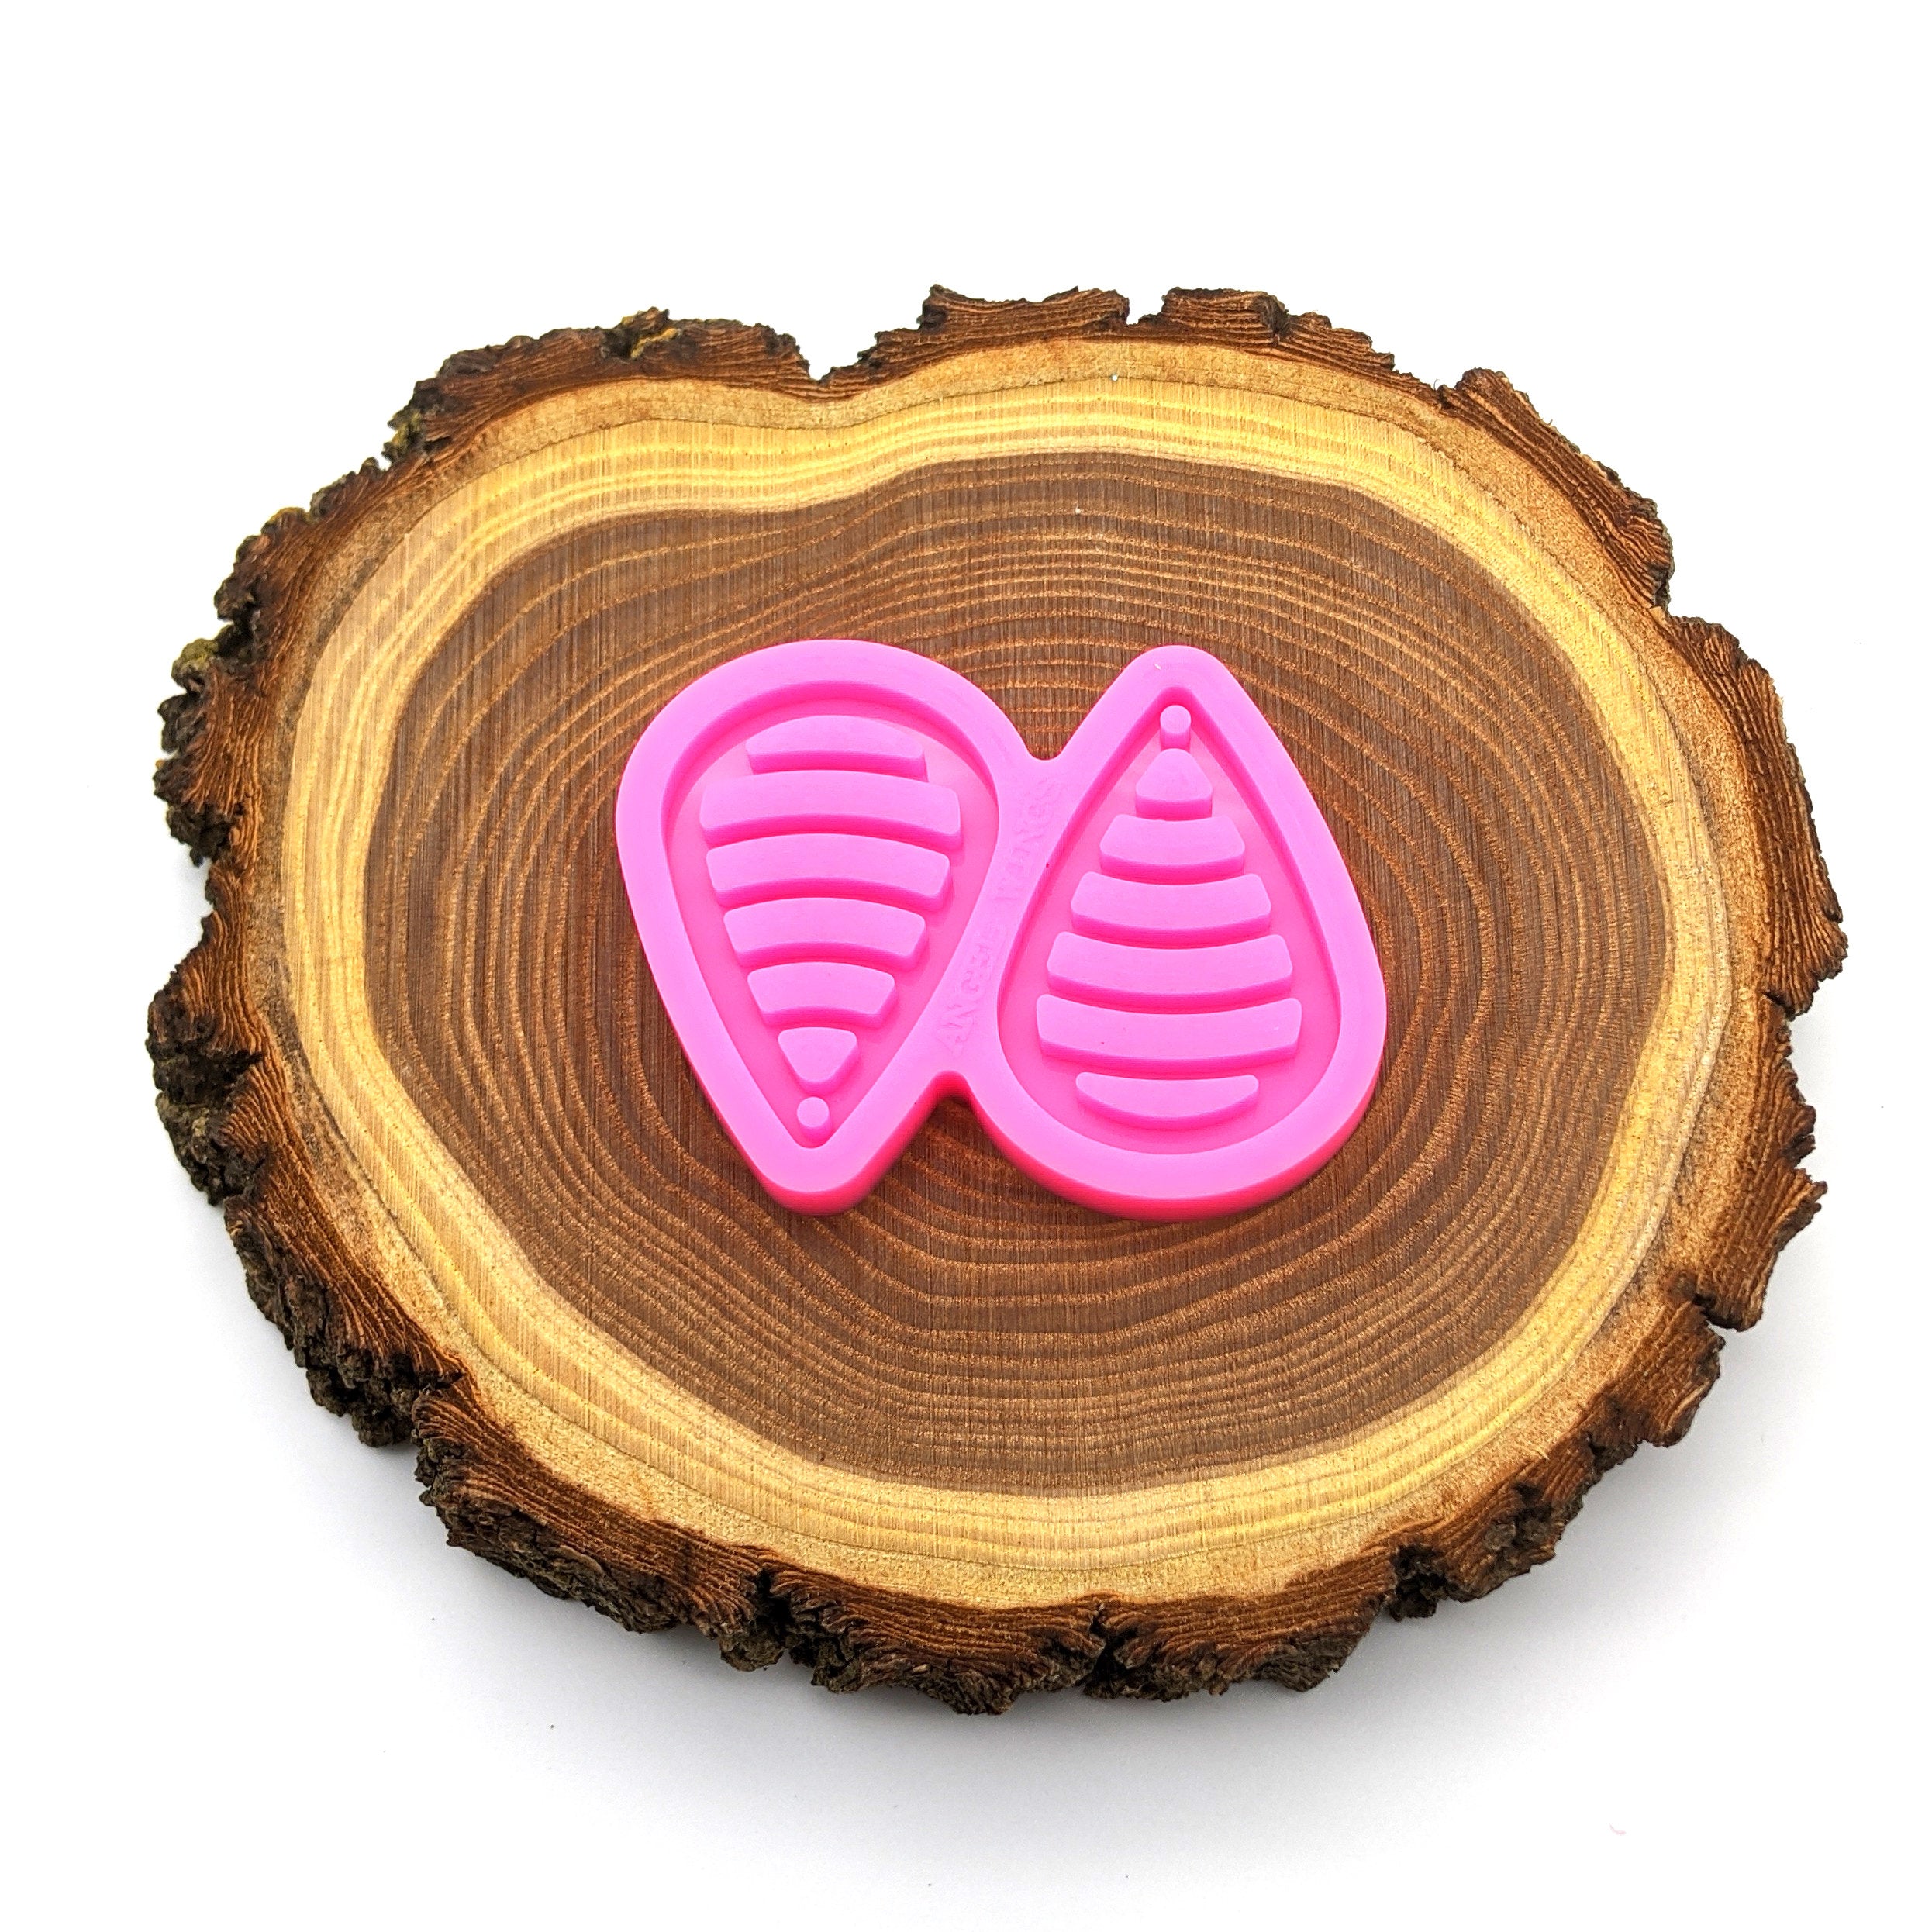 Striped Teardrop Earring Shiny Silicone Mold for Epoxy Resin Jewelry Making Silicone Mold